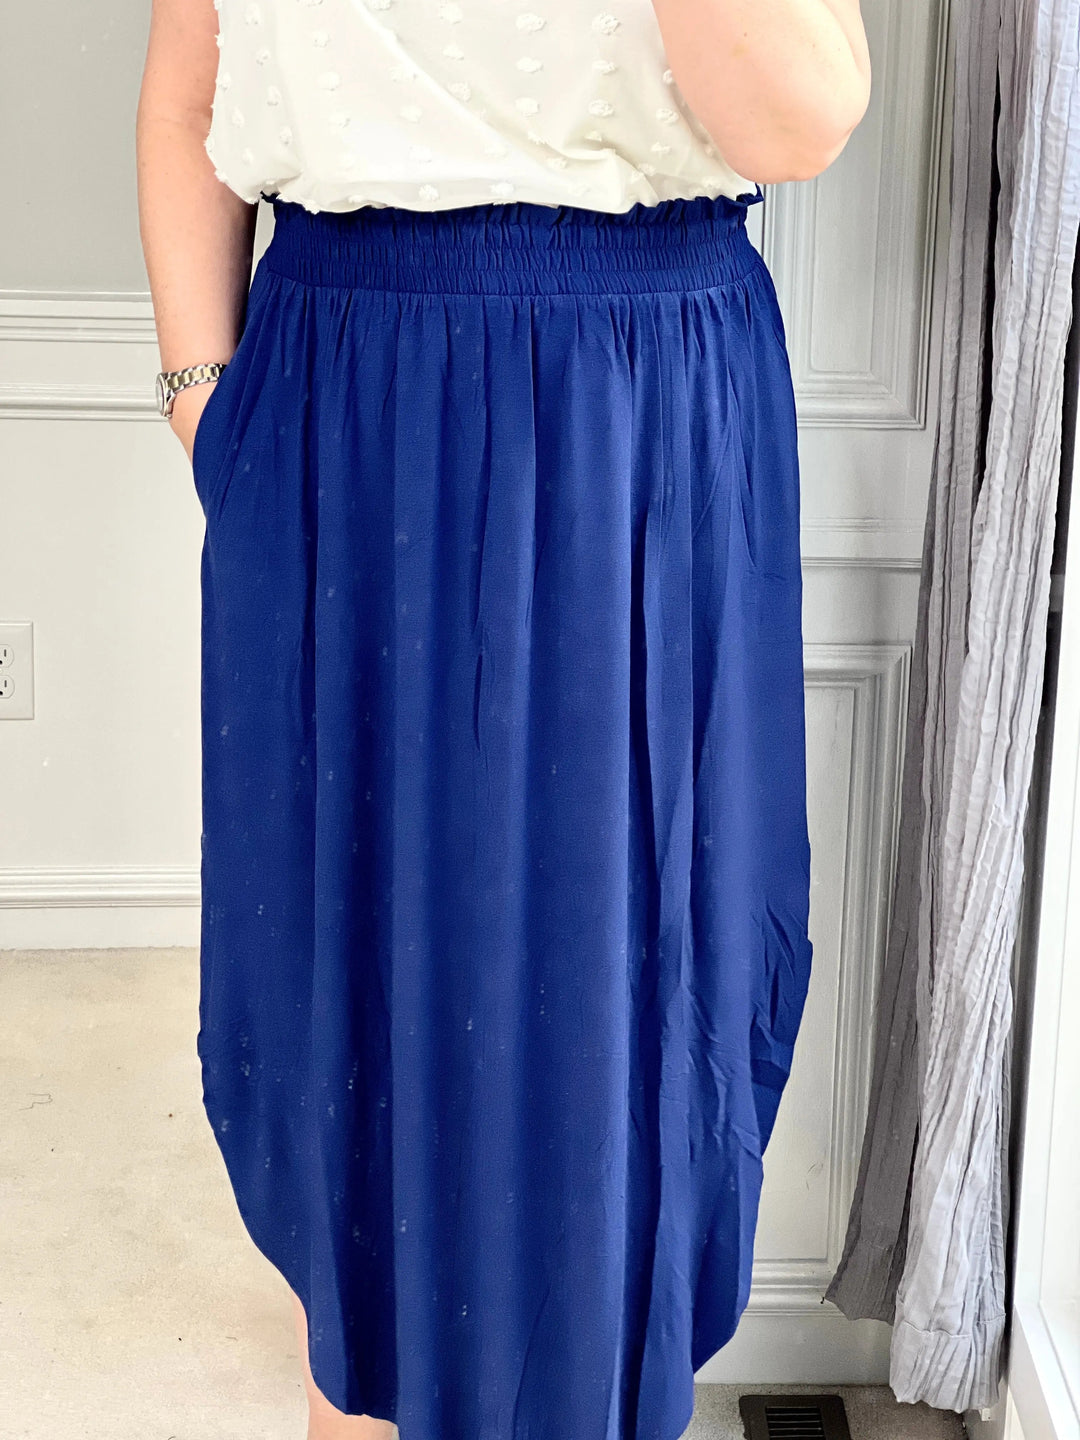 Smocked Waist Maxi Skirt with Side Slits and Pockets (3 colors)-Skirts-Sample-Styled by Steph-Women's Fashion Clothing Boutique, Indiana